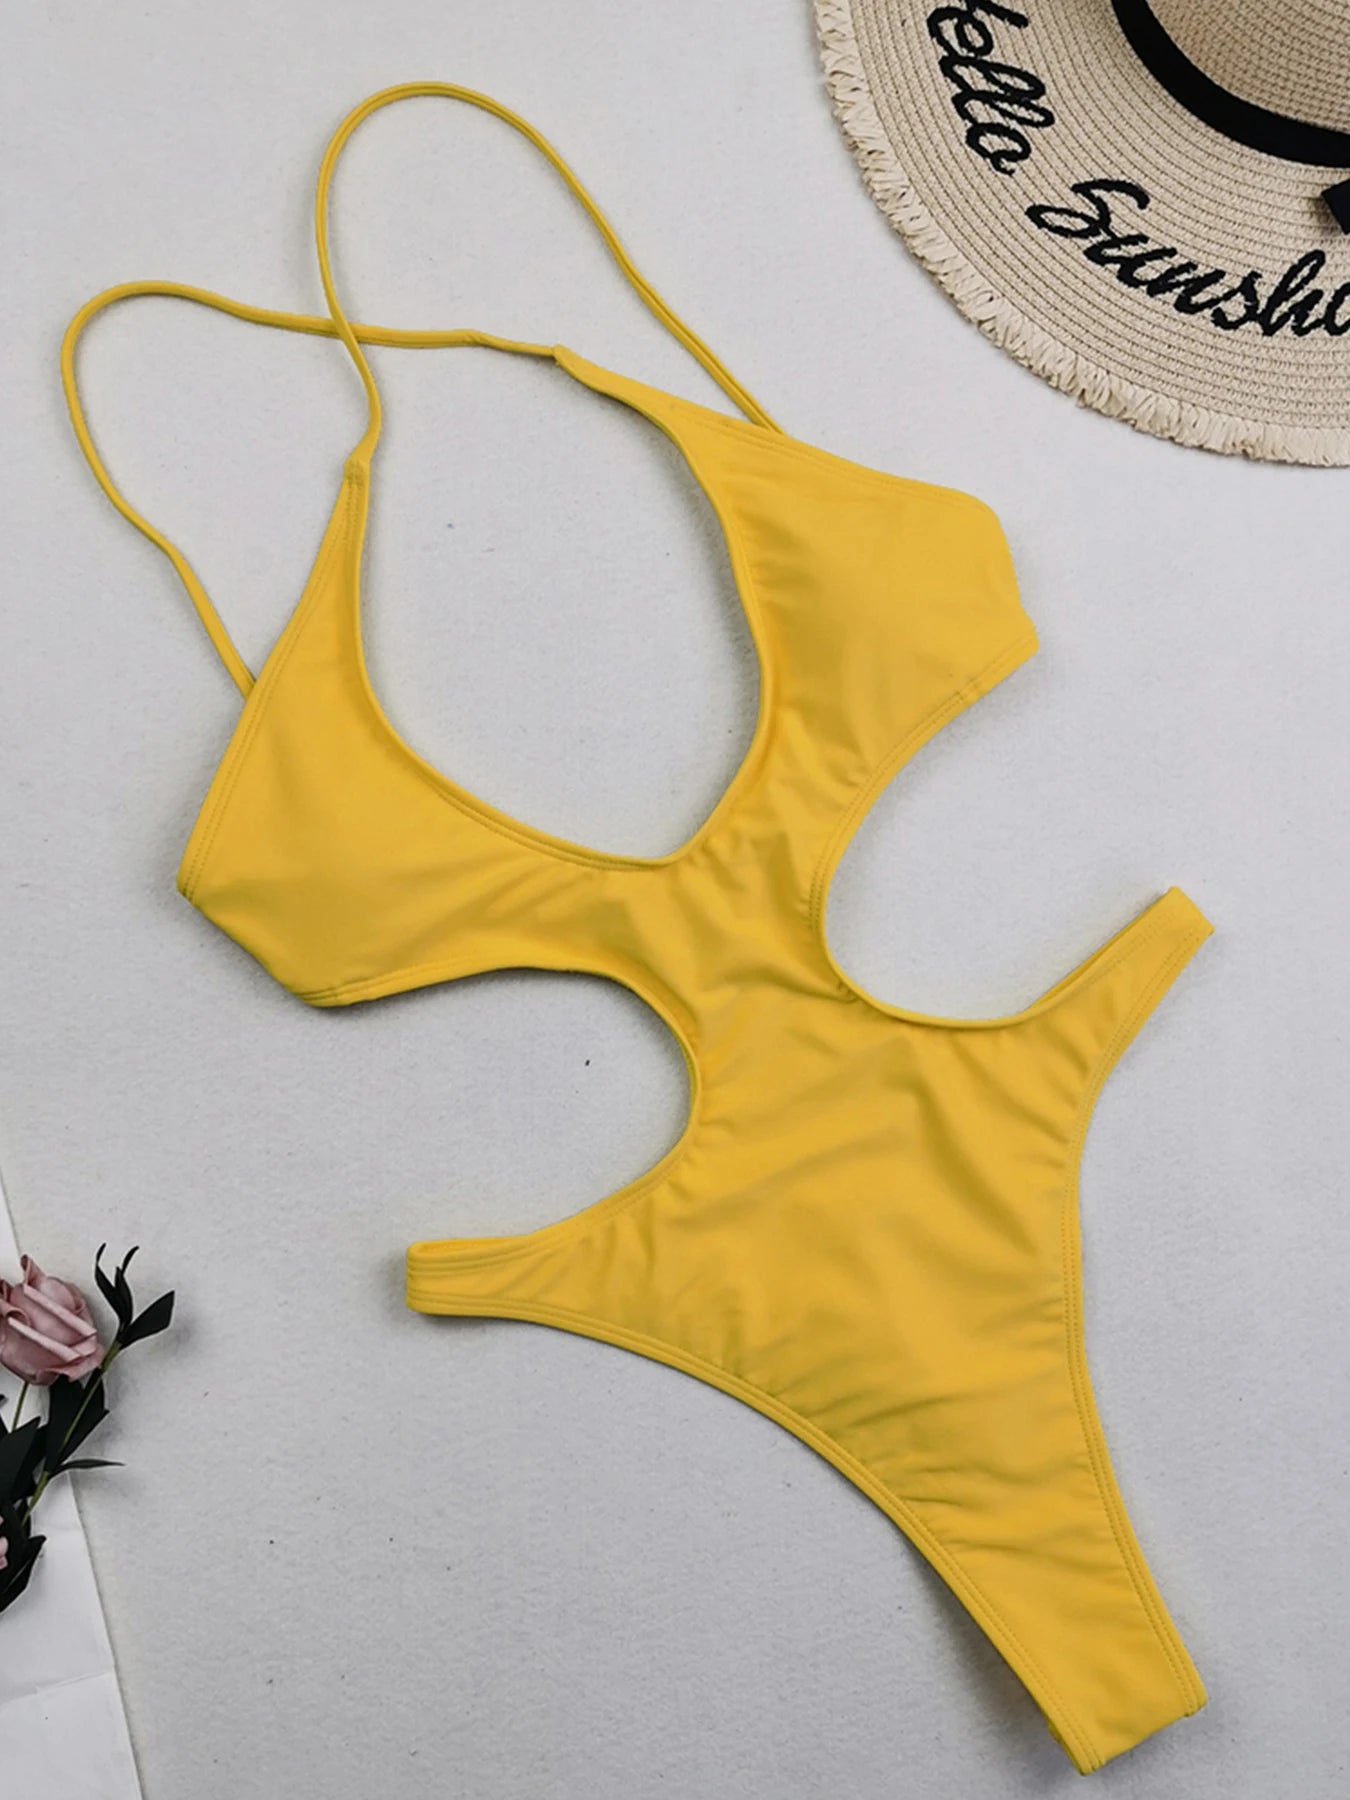 Solid Hollow Out One Piece Swimsuit Plus Size Swimwear Women Backless Bathing Suits Summer Beach Wear Monokini The Clothing Company Sydney